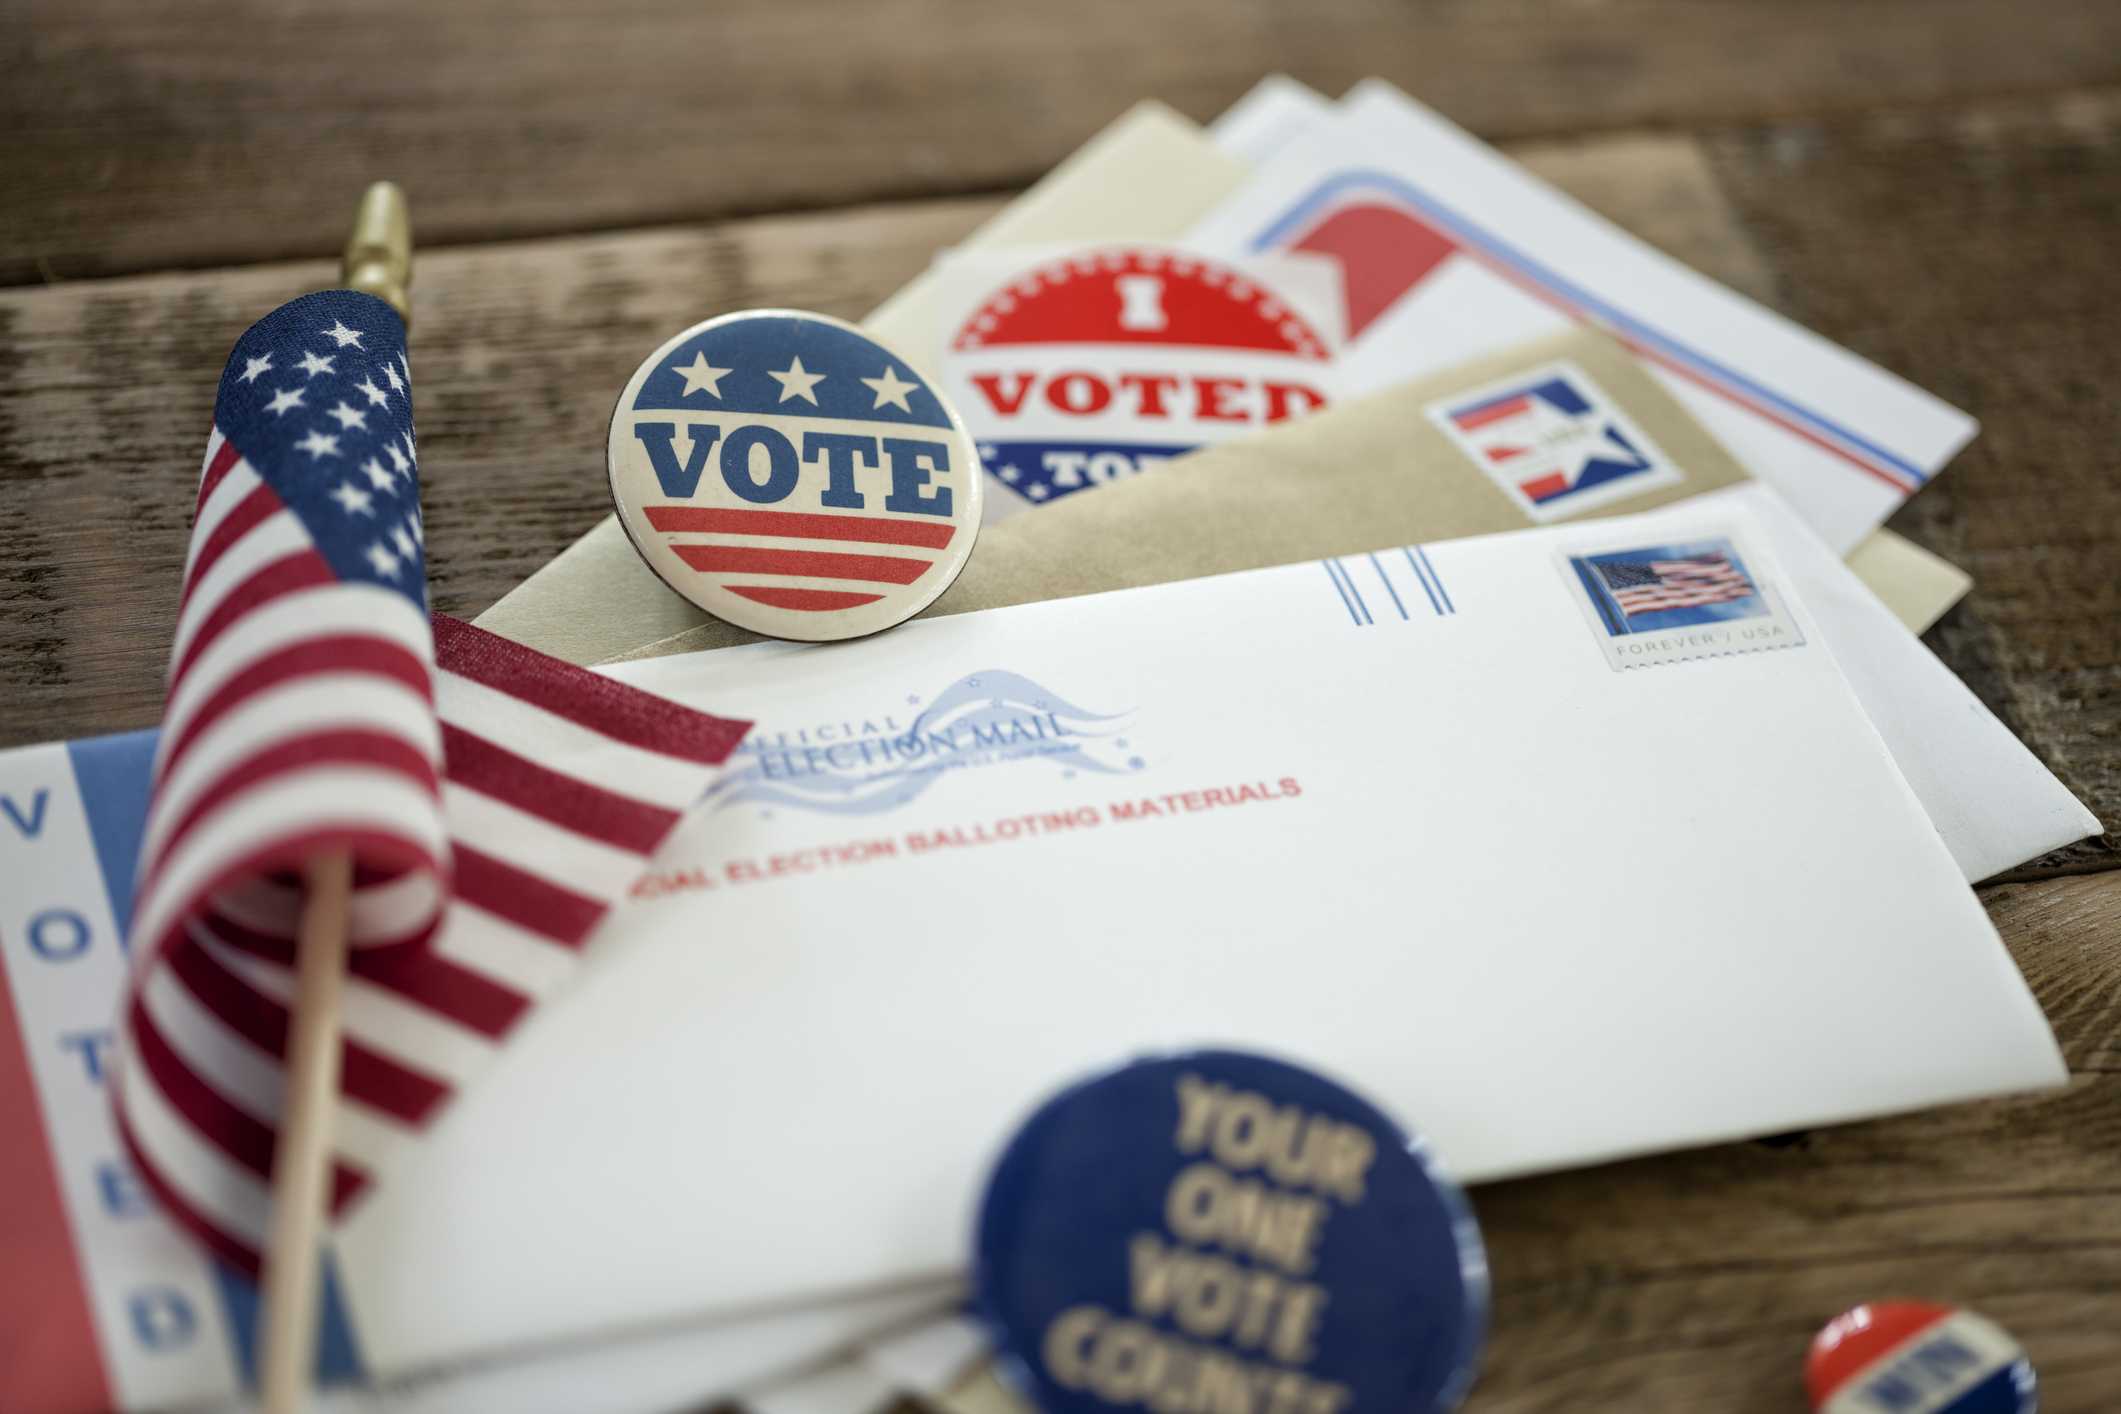 voting-by-mail-concept-royalty-free-image-1600972740